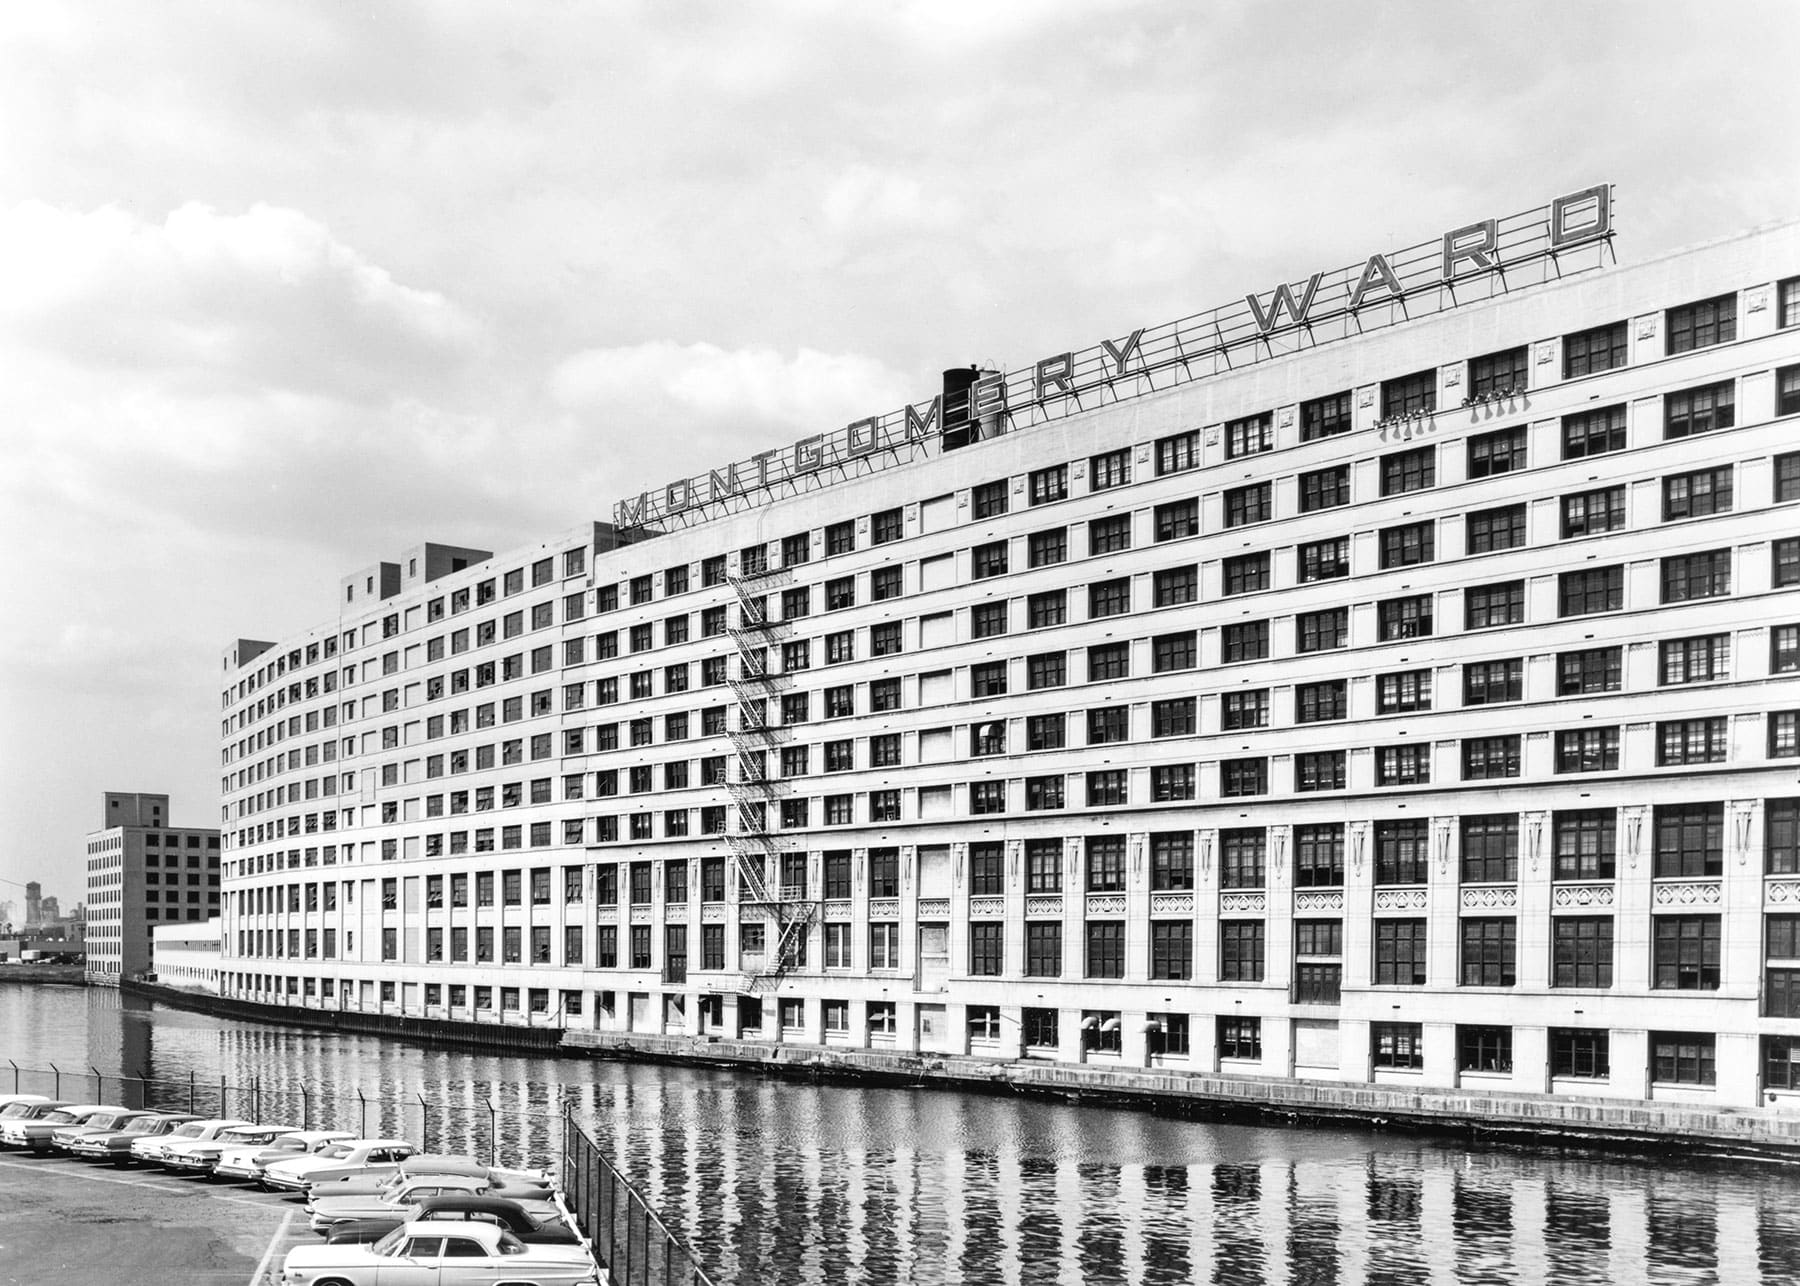 The former Montgomery Ward Warehouse Complex at 618 West Chicago Avenue is pictured here circa the 1960s.